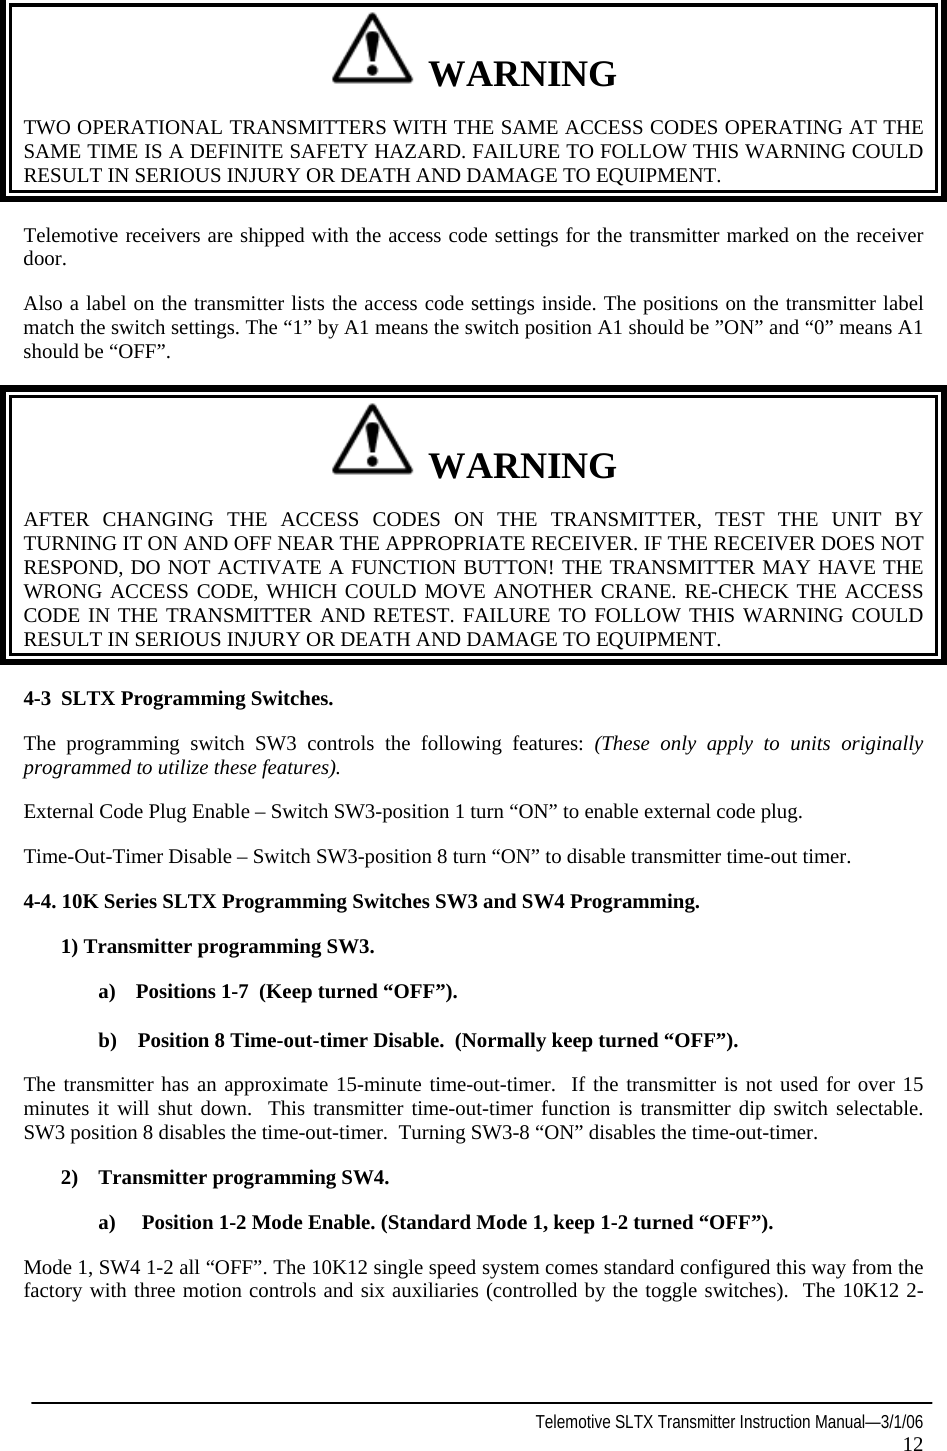  Telemotive SLTX Transmitter Instruction Manual—3/1/06 12    WARNING TWO OPERATIONAL TRANSMITTERS WITH THE SAME ACCESS CODES OPERATING AT THE SAME TIME IS A DEFINITE SAFETY HAZARD. FAILURE TO FOLLOW THIS WARNING COULD RESULT IN SERIOUS INJURY OR DEATH AND DAMAGE TO EQUIPMENT. Telemotive receivers are shipped with the access code settings for the transmitter marked on the receiver door.  Also a label on the transmitter lists the access code settings inside. The positions on the transmitter label match the switch settings. The “1” by A1 means the switch position A1 should be ”ON” and “0” means A1 should be “OFF”.   WARNING AFTER CHANGING THE ACCESS CODES ON THE TRANSMITTER, TEST THE UNIT BY TURNING IT ON AND OFF NEAR THE APPROPRIATE RECEIVER. IF THE RECEIVER DOES NOT RESPOND, DO NOT ACTIVATE A FUNCTION BUTTON! THE TRANSMITTER MAY HAVE THE WRONG ACCESS CODE, WHICH COULD MOVE ANOTHER CRANE. RE-CHECK THE ACCESS CODE IN THE TRANSMITTER AND RETEST. FAILURE TO FOLLOW THIS WARNING COULD RESULT IN SERIOUS INJURY OR DEATH AND DAMAGE TO EQUIPMENT. 4-3 SLTX Programming Switches. The programming switch SW3 controls the following features: (These only apply to units originally programmed to utilize these features). External Code Plug Enable – Switch SW3-position 1 turn “ON” to enable external code plug. Time-Out-Timer Disable – Switch SW3-position 8 turn “ON” to disable transmitter time-out timer. 4-4. 10K Series SLTX Programming Switches SW3 and SW4 Programming.   1) Transmitter programming SW3. a)  Positions 1-7  (Keep turned “OFF”). b)    Position 8 Time-out-timer Disable.  (Normally keep turned “OFF”). The transmitter has an approximate 15-minute time-out-timer.  If the transmitter is not used for over 15 minutes it will shut down.  This transmitter time-out-timer function is transmitter dip switch selectable.  SW3 position 8 disables the time-out-timer.  Turning SW3-8 “ON” disables the time-out-timer.   2)  Transmitter programming SW4. a)     Position 1-2 Mode Enable. (Standard Mode 1, keep 1-2 turned “OFF”). Mode 1, SW4 1-2 all “OFF”. The 10K12 single speed system comes standard configured this way from the factory with three motion controls and six auxiliaries (controlled by the toggle switches).  The 10K12 2-